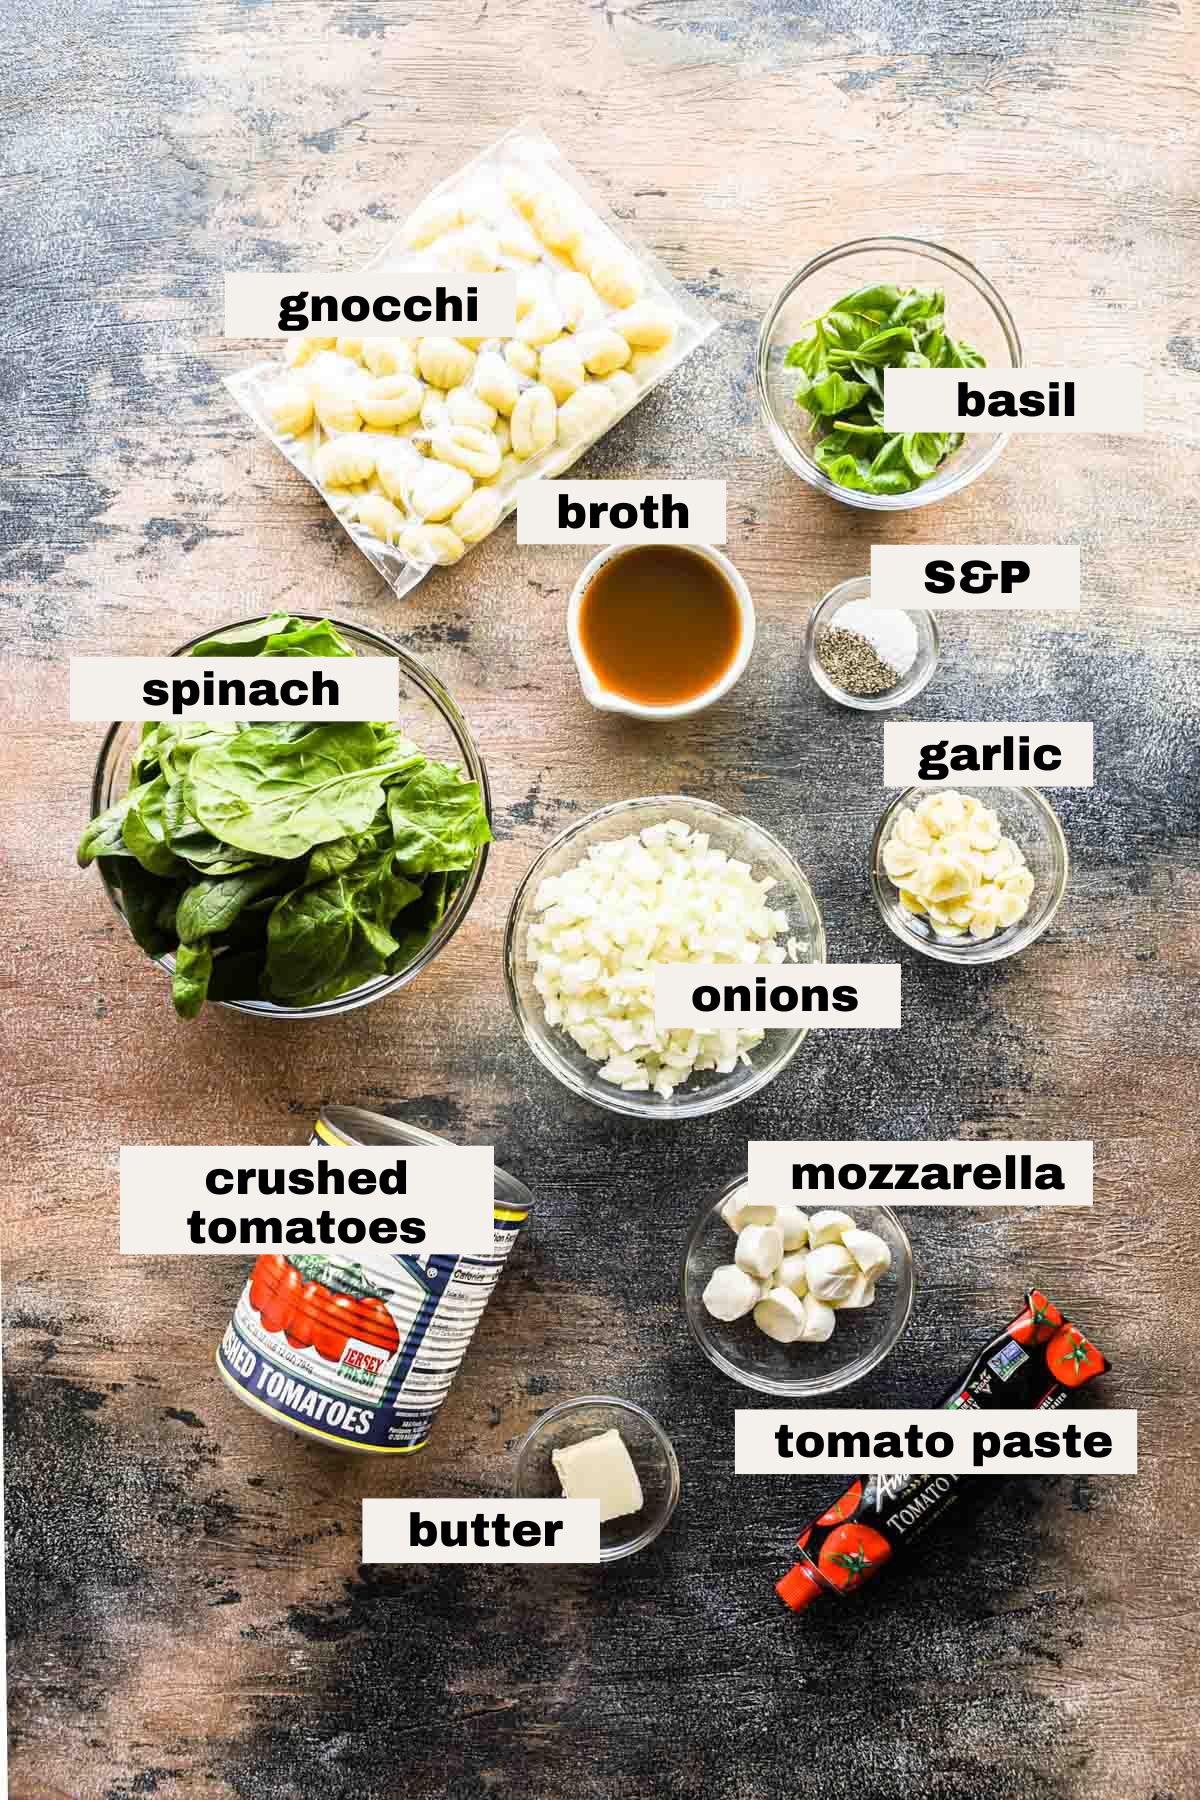 Labeled ingredients on a table.